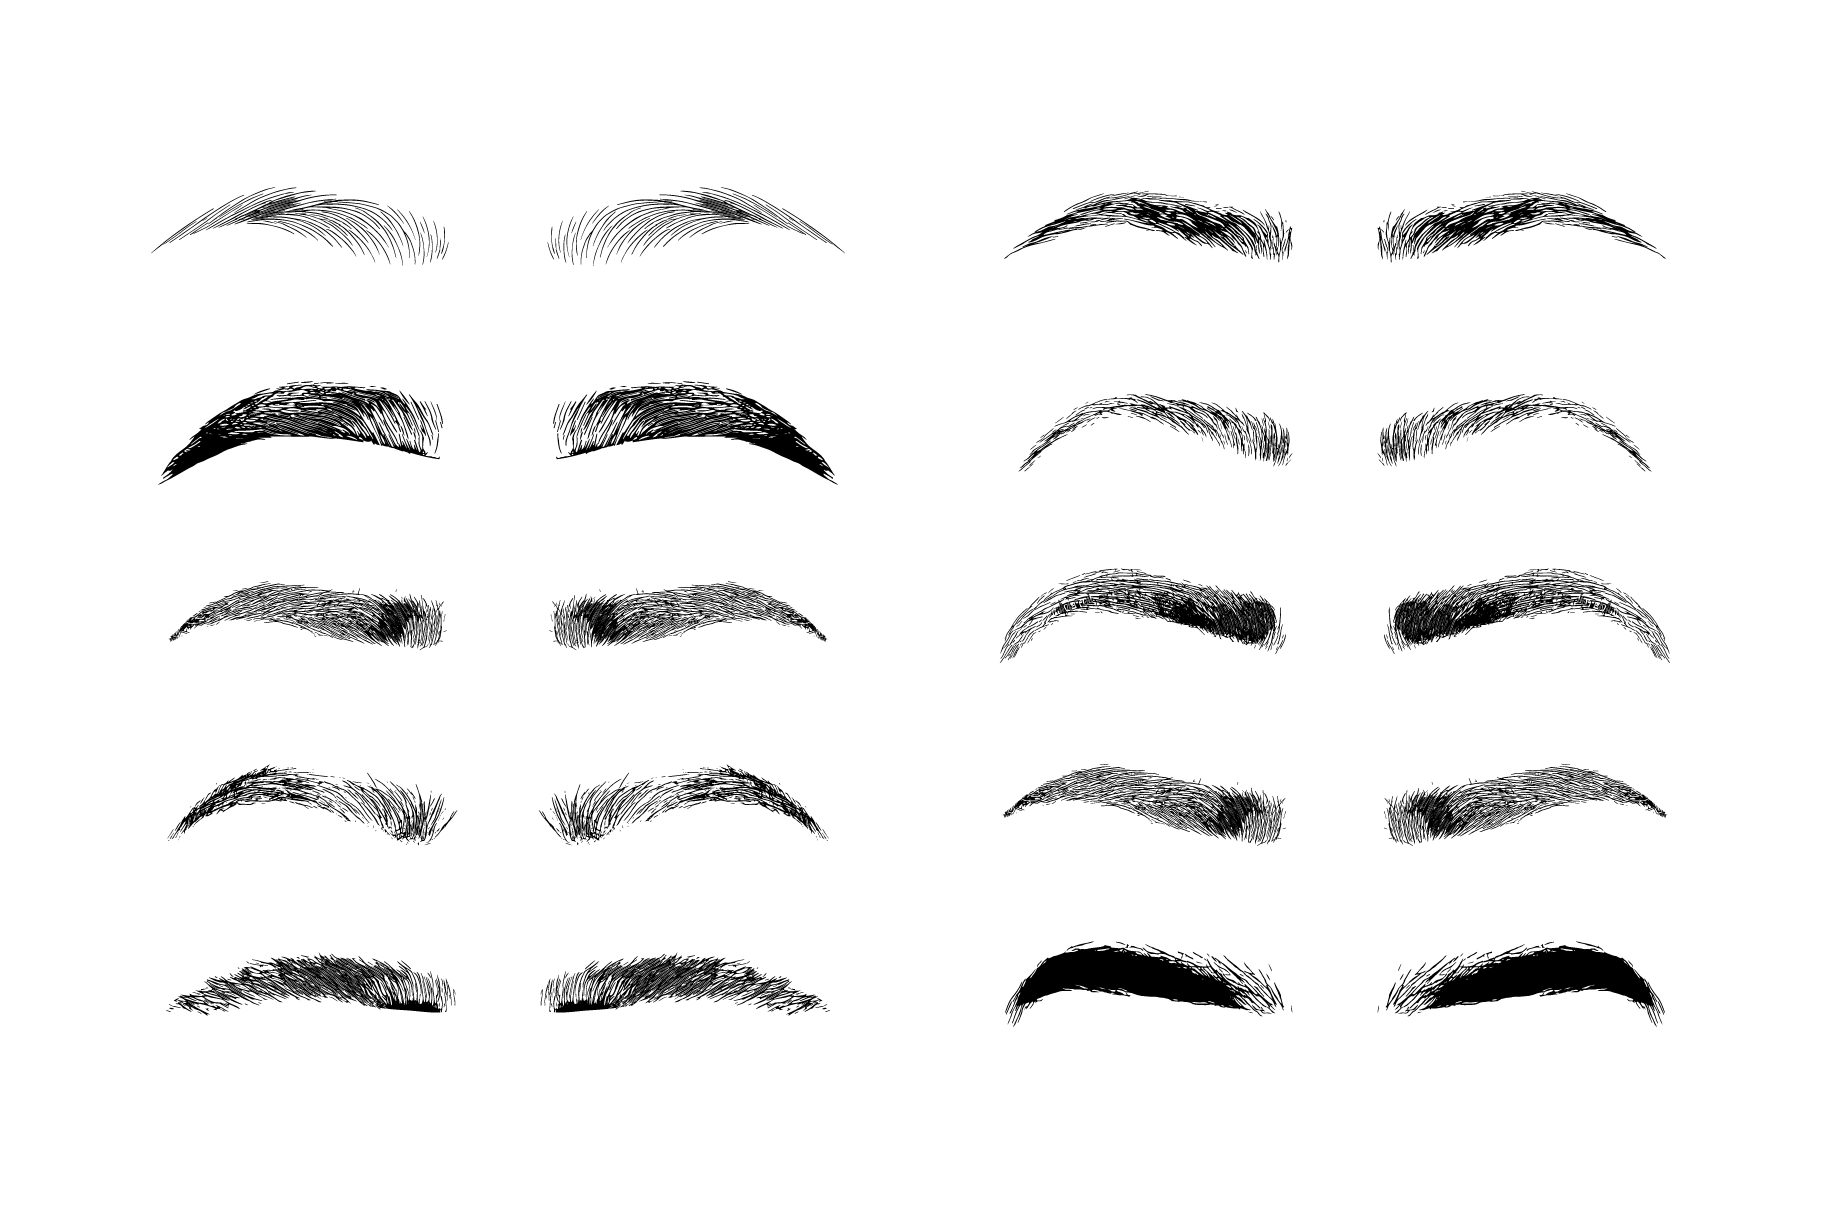 eyebrow-shapes-various-types-of-eyebrows-193499-illustrations